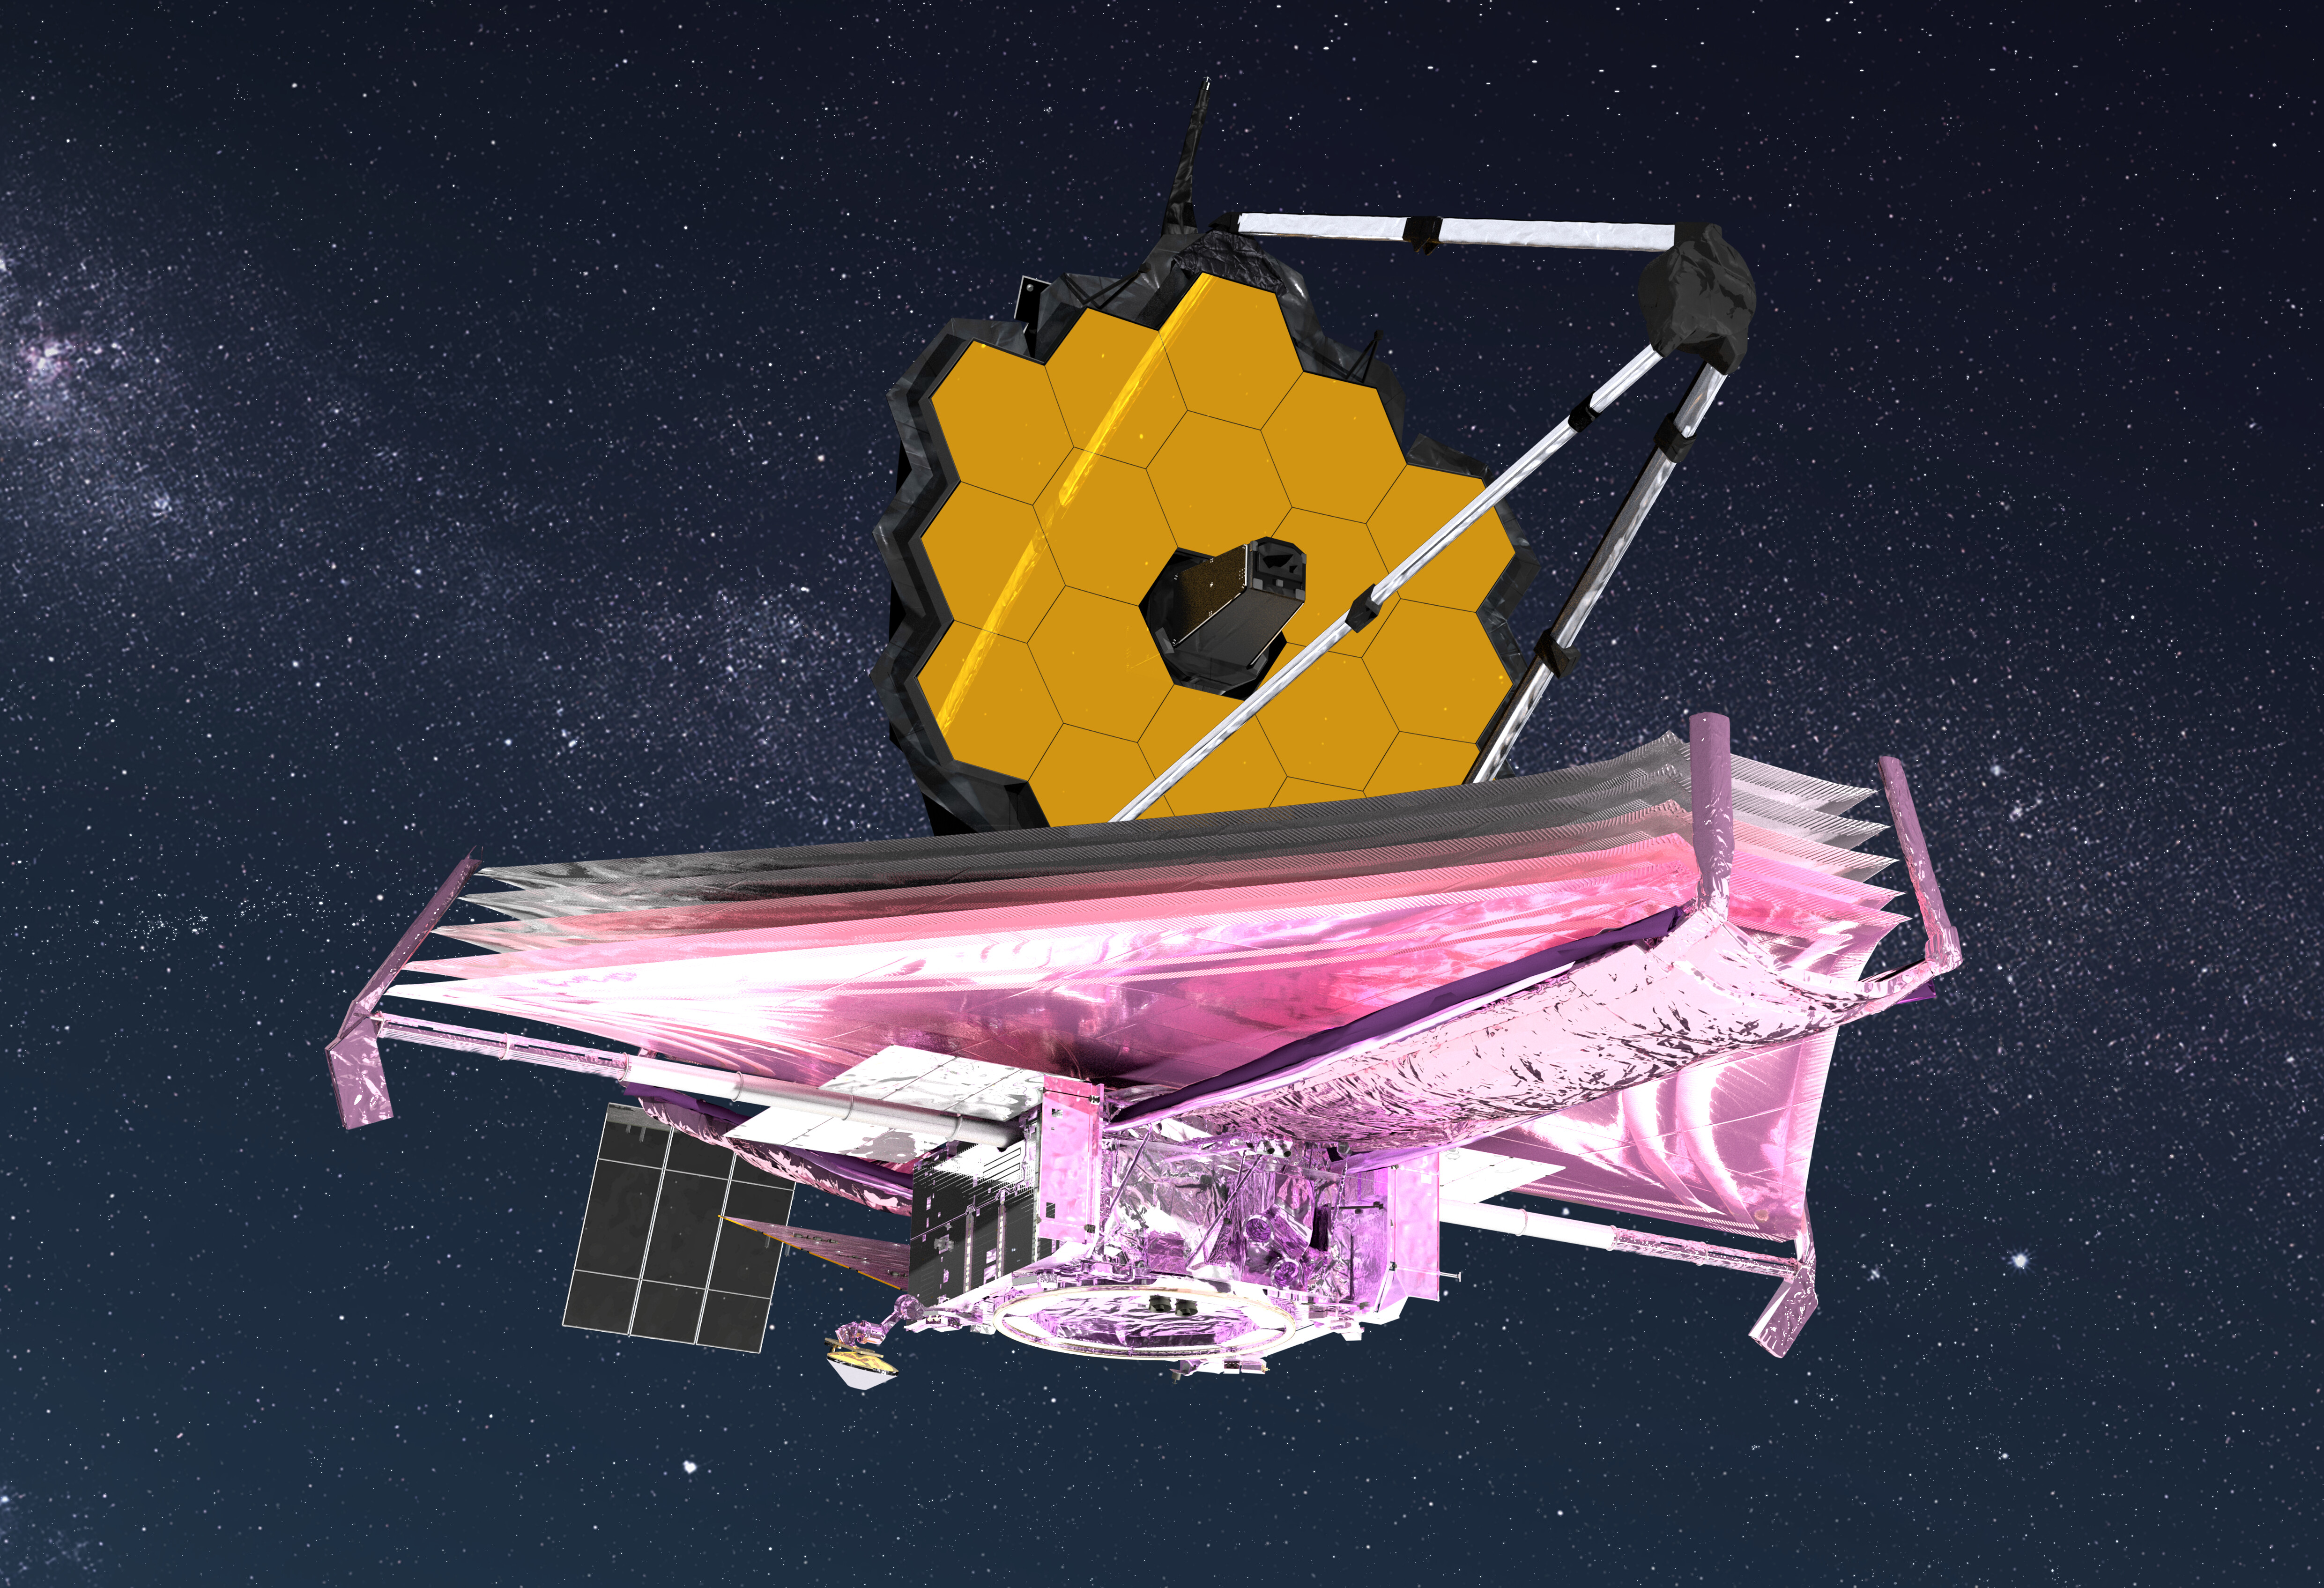 The slow cooldown of JWST’s MIRI was intentional because it enabled efficient scheduling of the deployment tasks and ensured the cleanliness of the optics by preventing water and molecular contamination transport. Credit: NASA GSFC